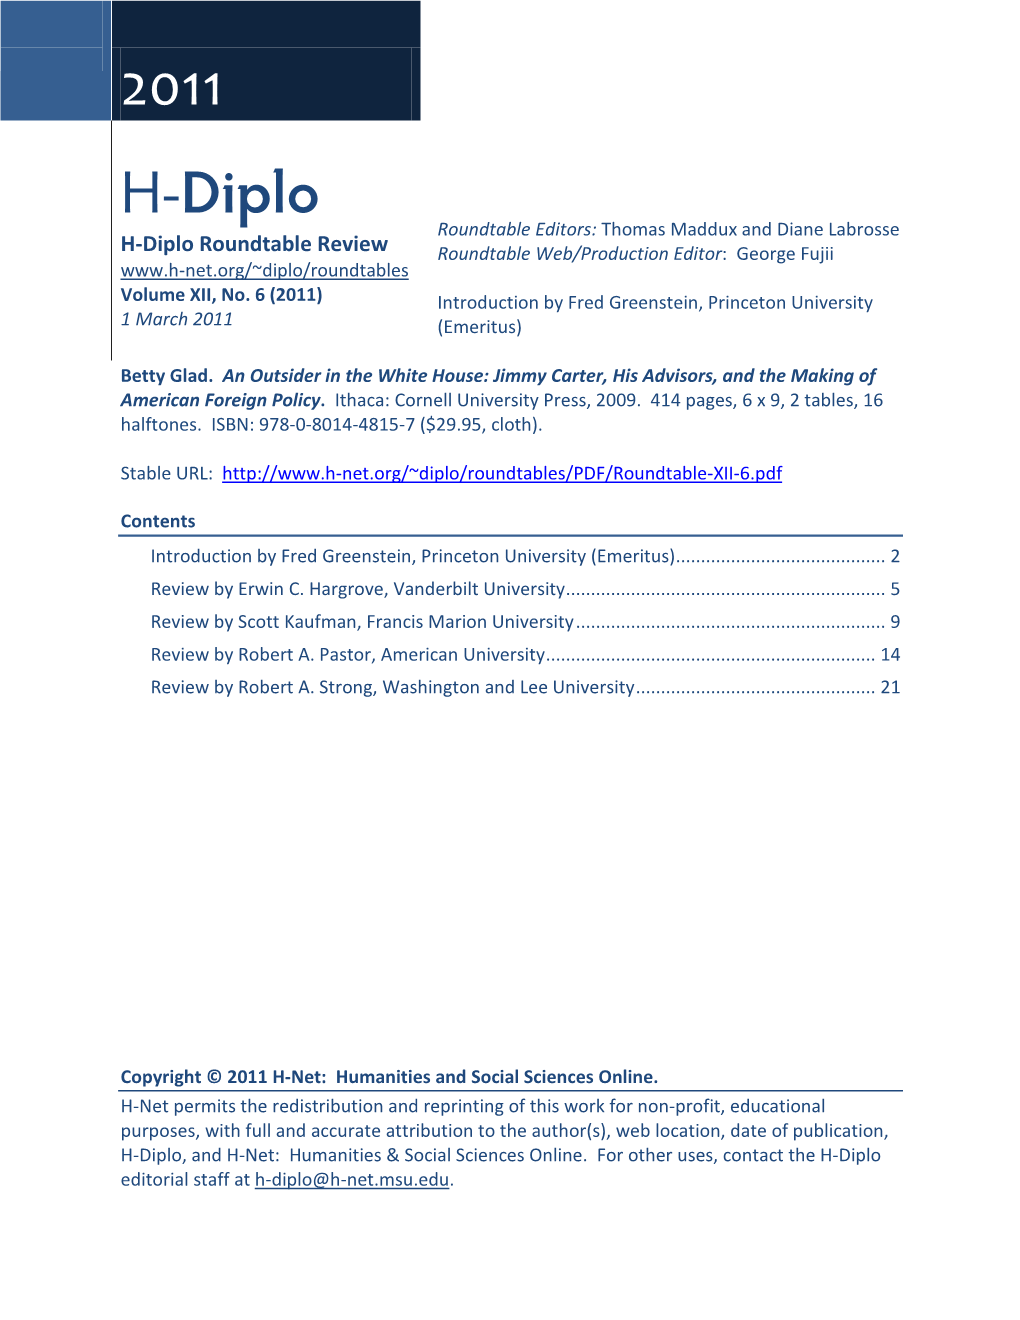 H-Diplo Roundtables, Vol. XII, No. 6